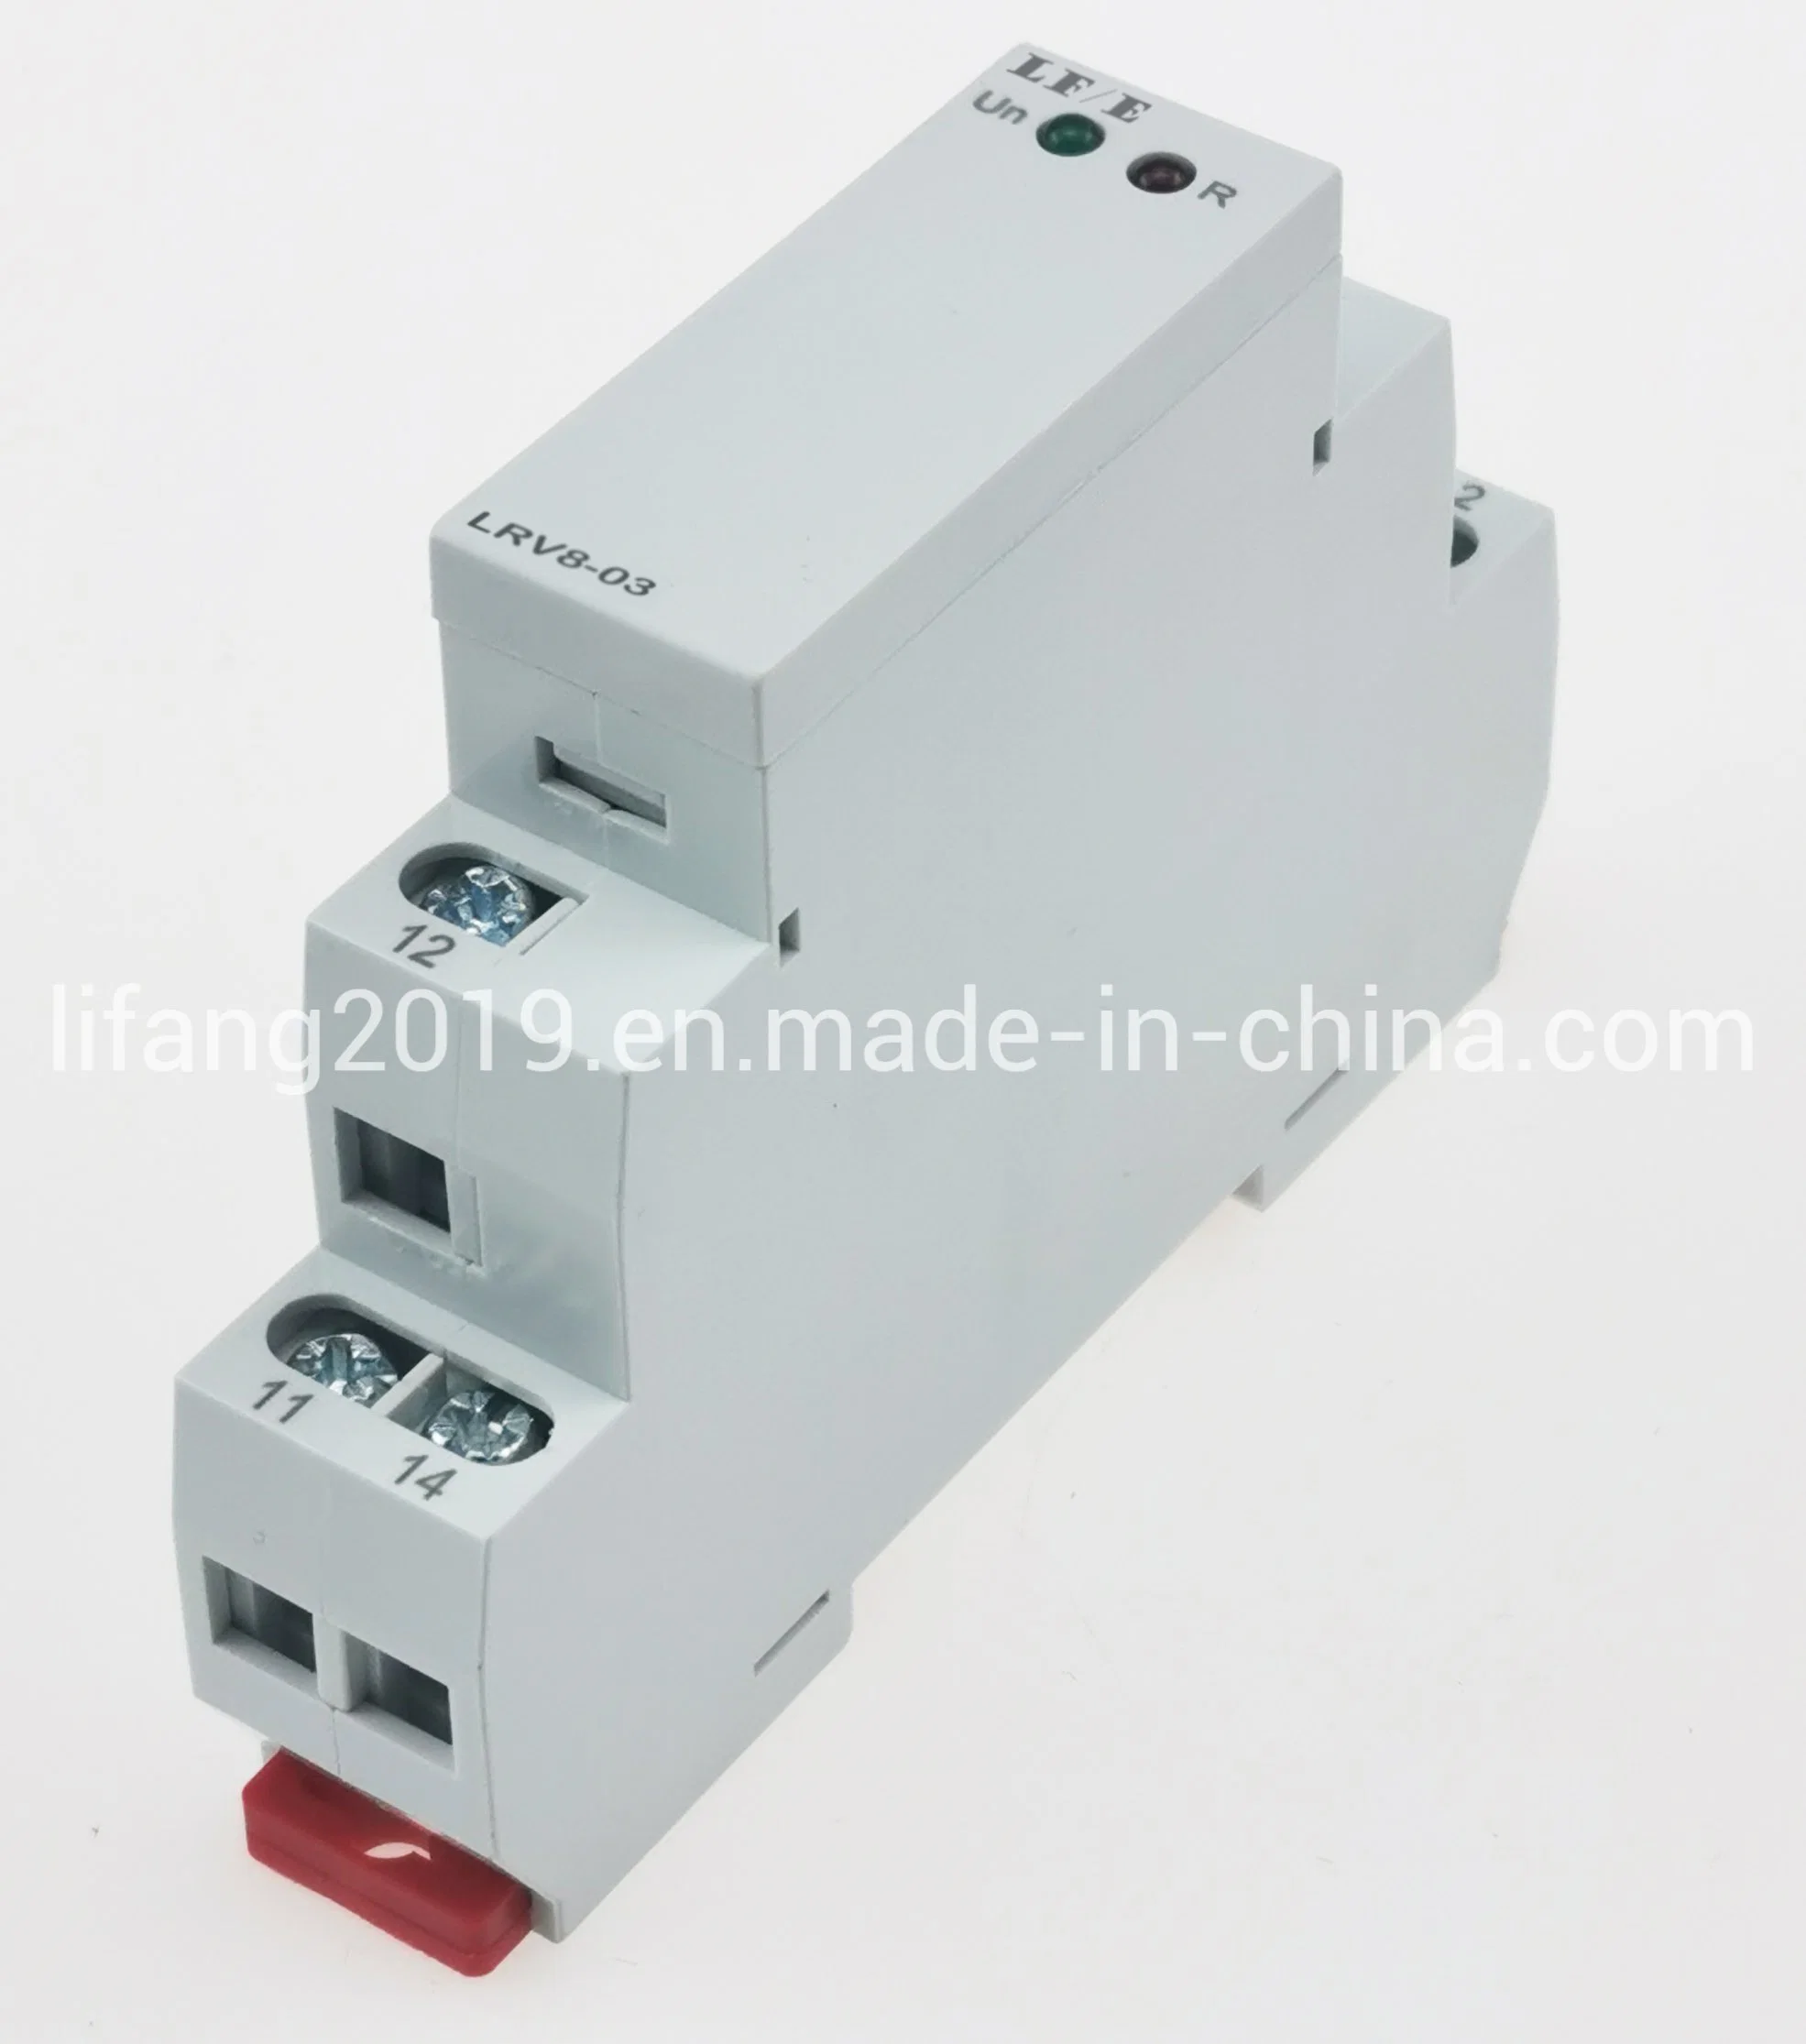 Lrv8-05 Type 3 Phase Monitoring Voltage Relay, Industrial Control Phase Sequence and Phase Failure Protection Relay, 3 Phase Monitoring Voltage Relay